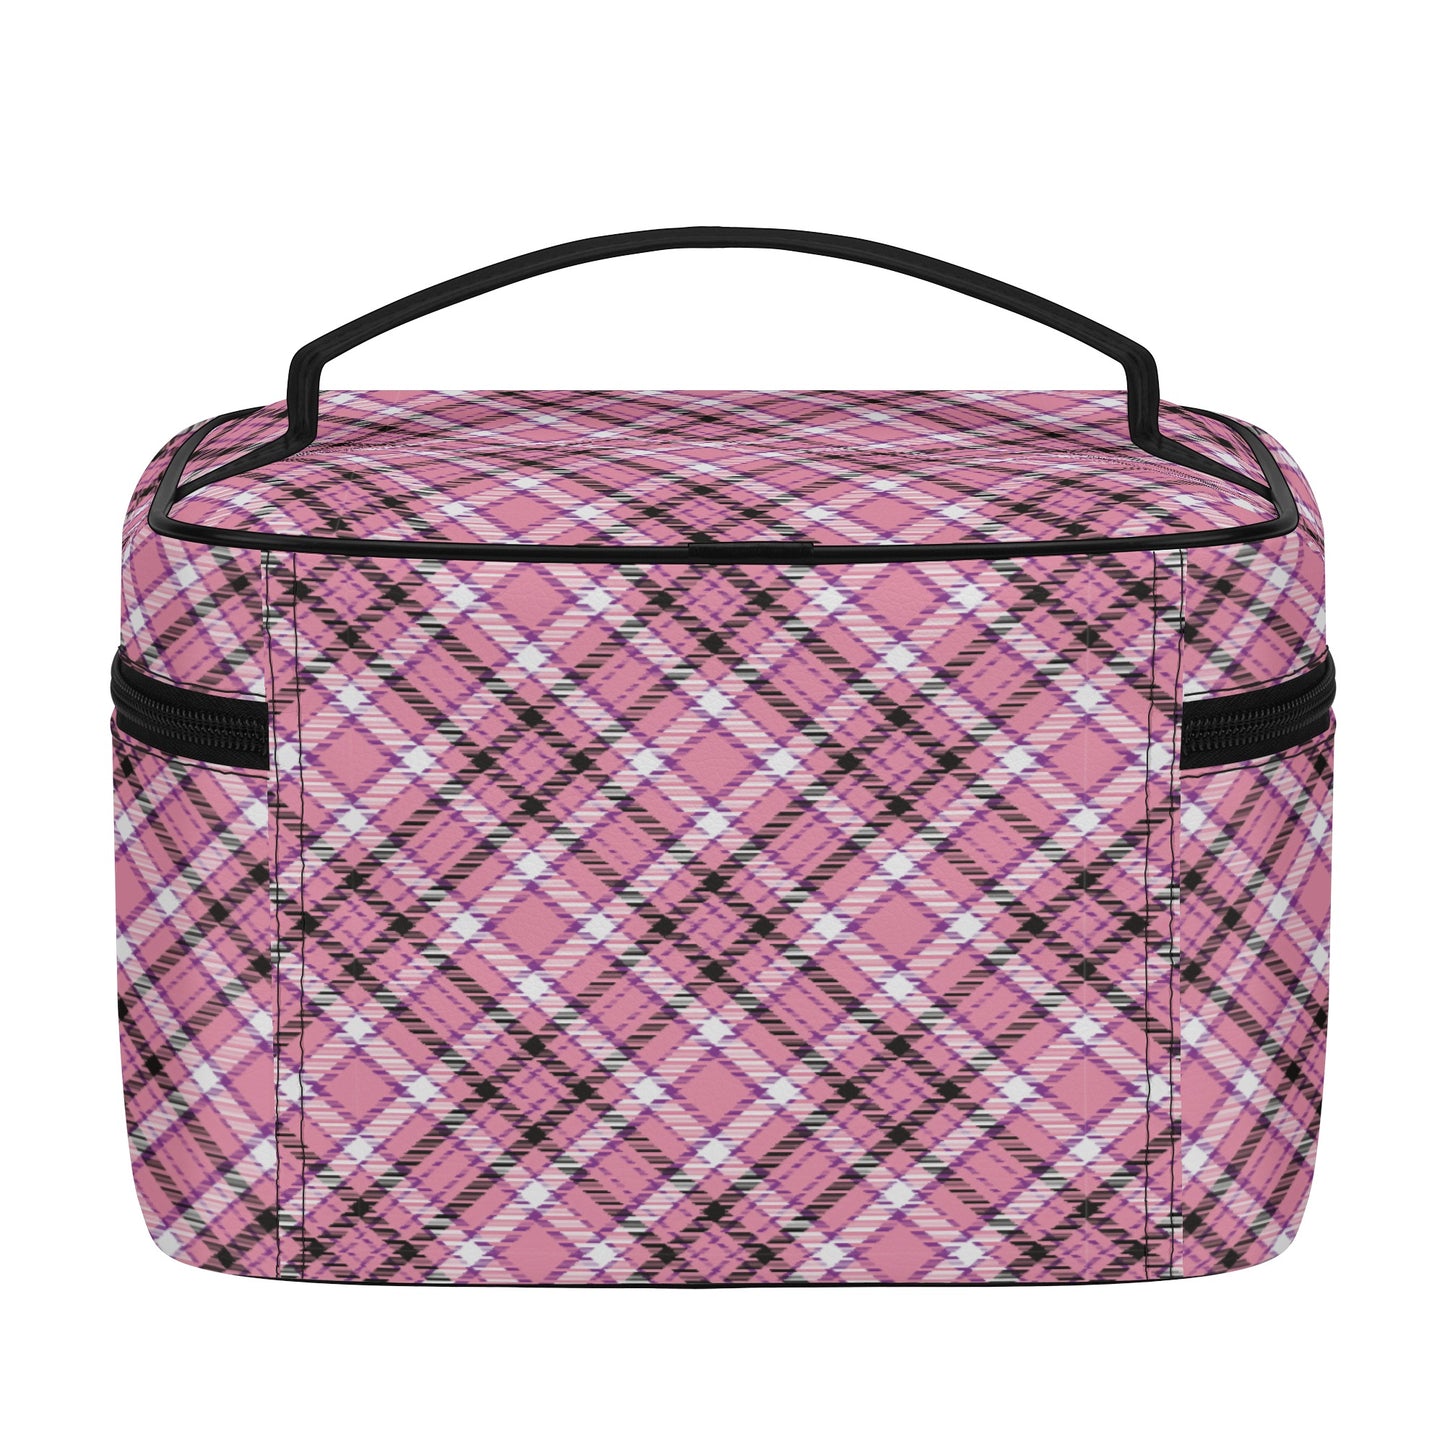 Chic Contrast: Pink & Black Argyle Plaid Pattern - Cosmetic or Toiletry Bag Faux Leather (PU)